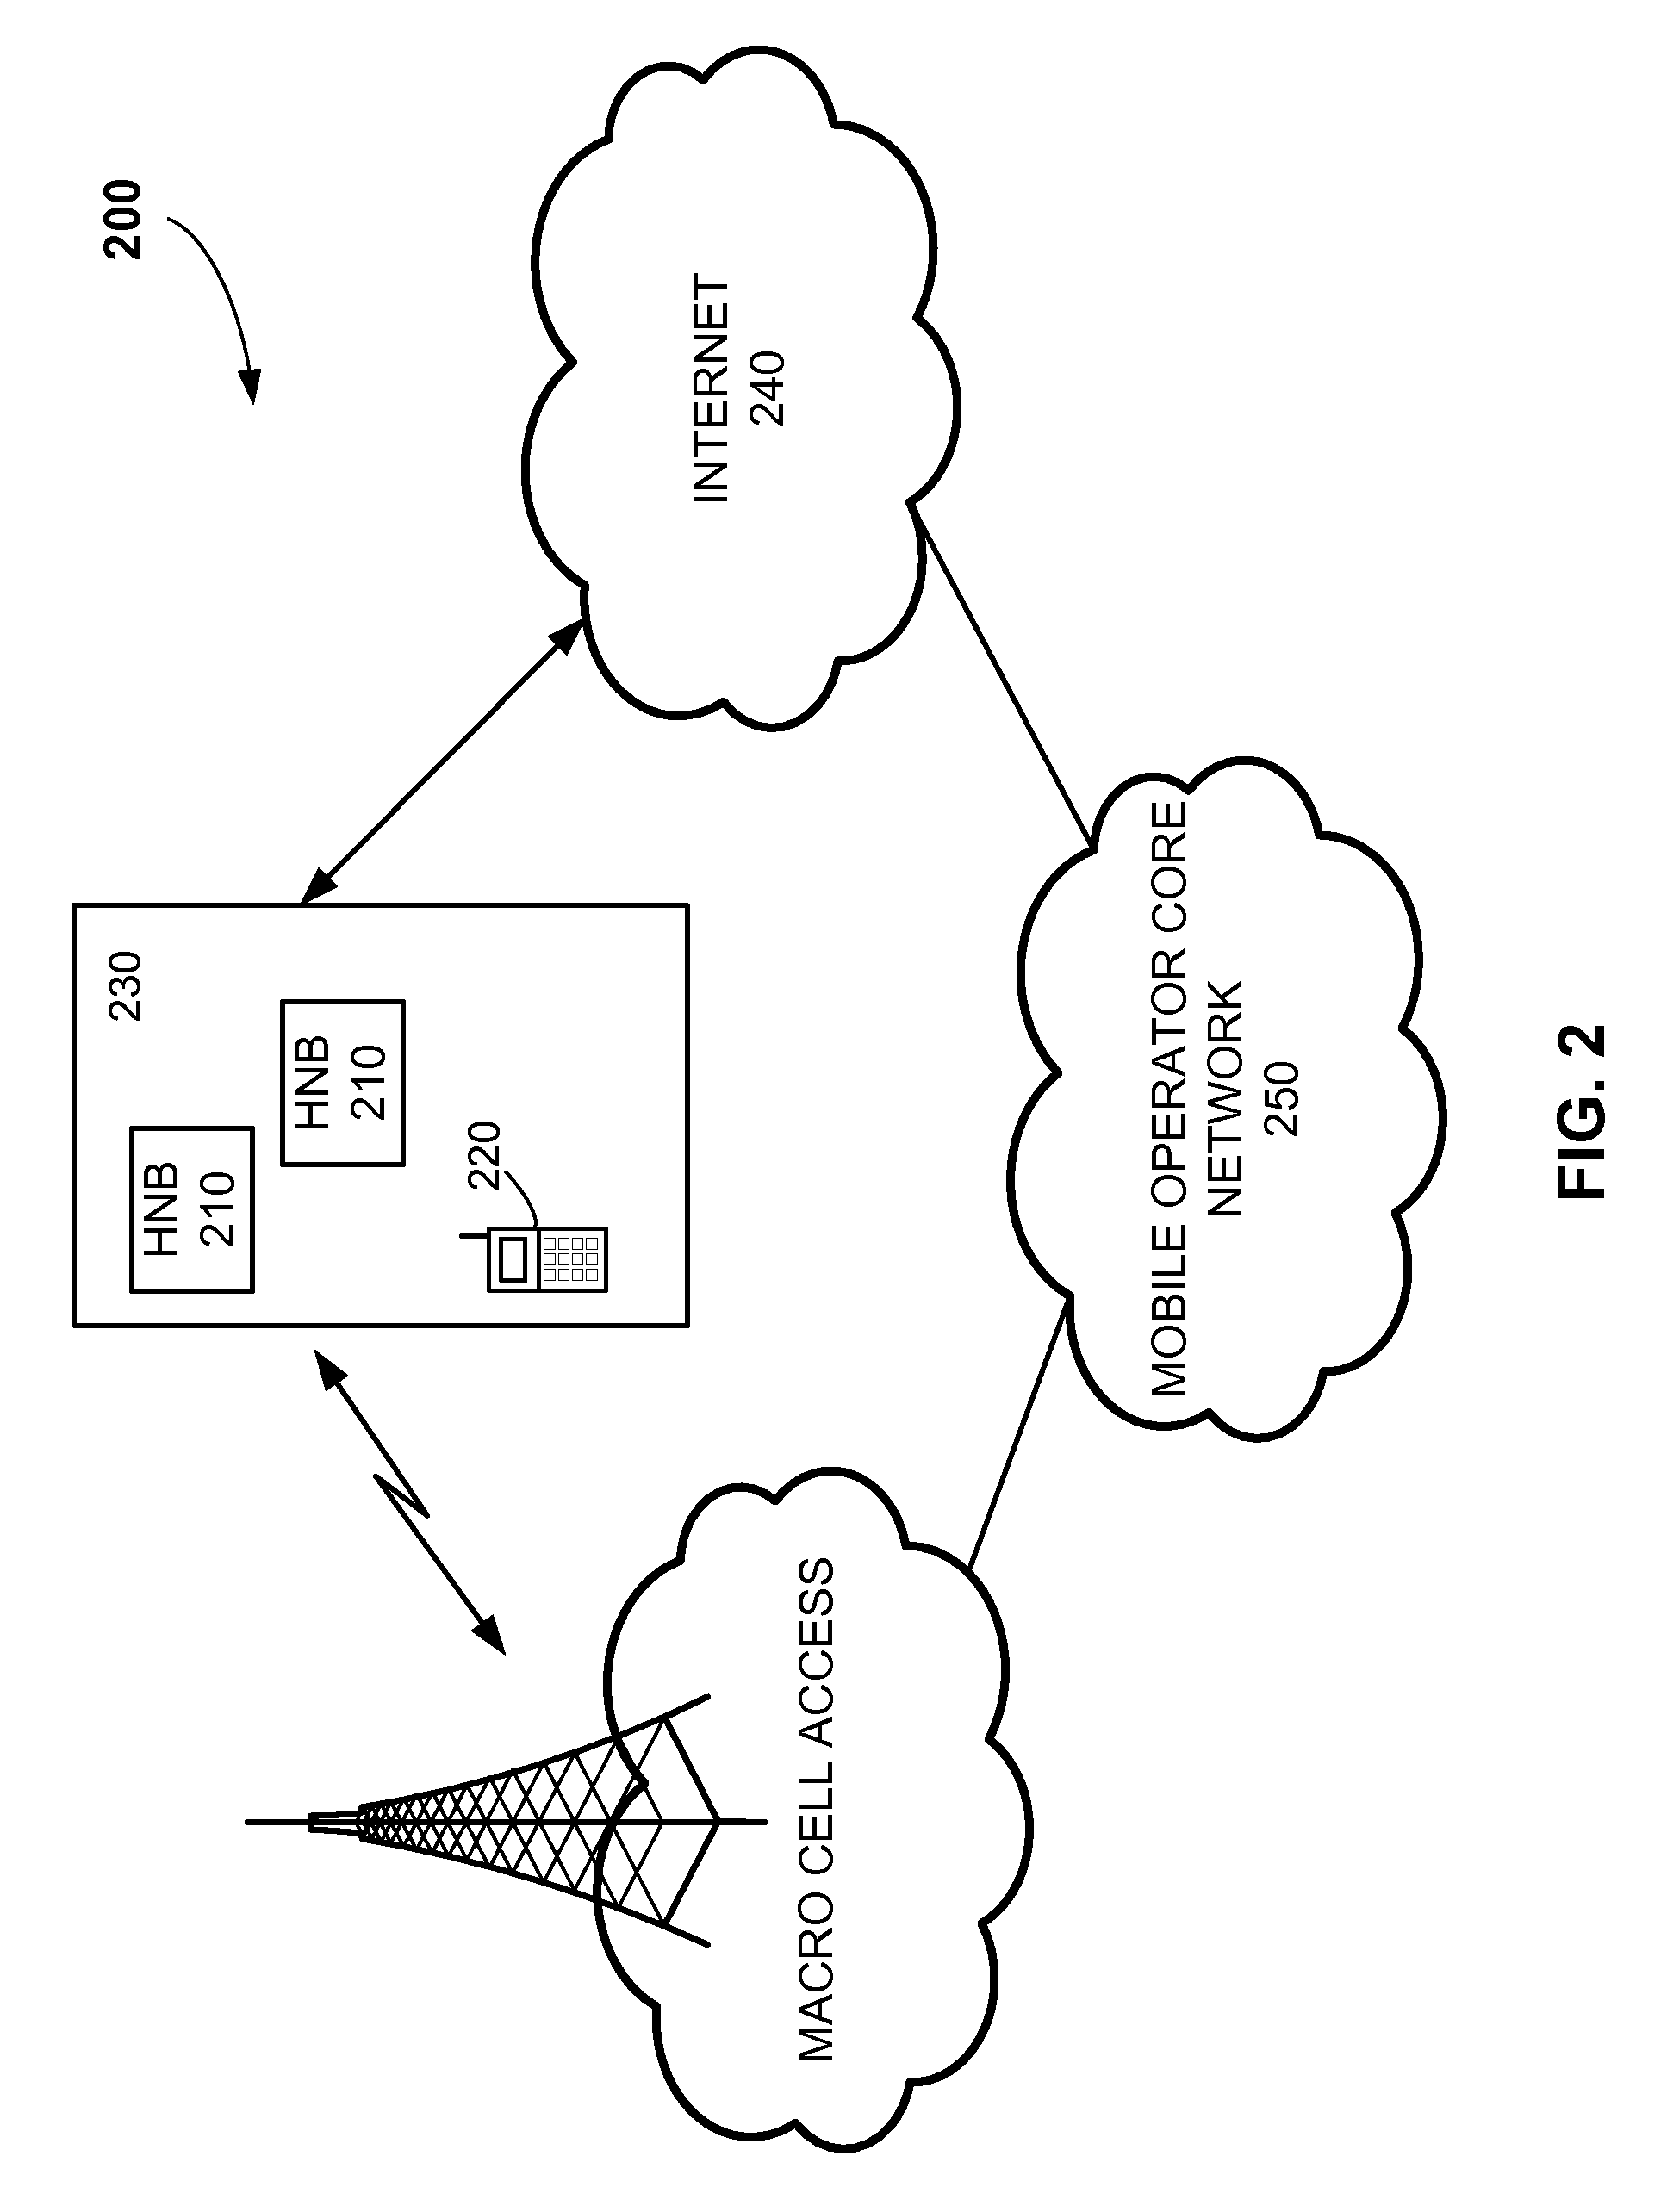 System and method to locate femto cells with passive assistance from a macro cellular wireless network